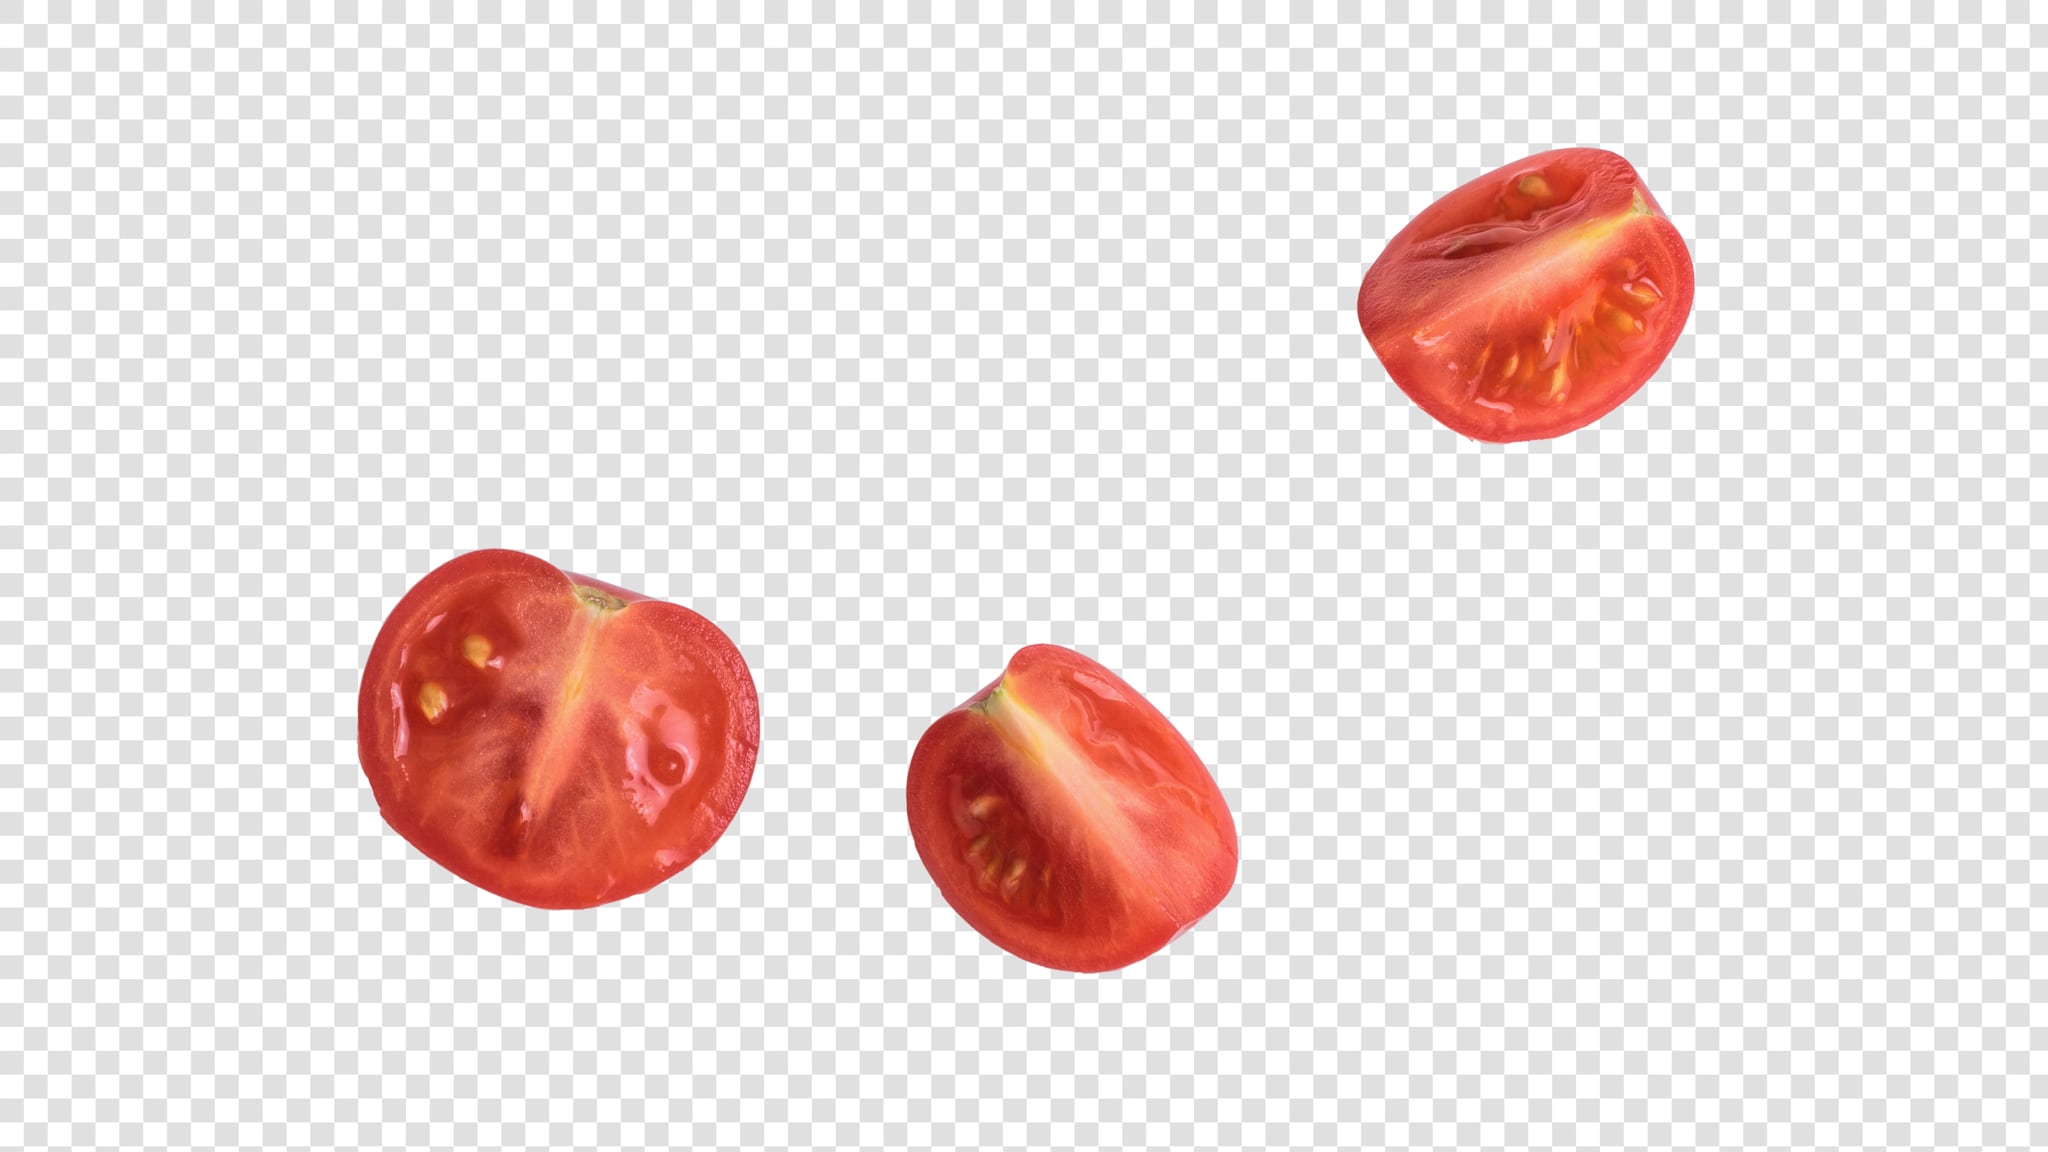 Tomato image asset with transparent background